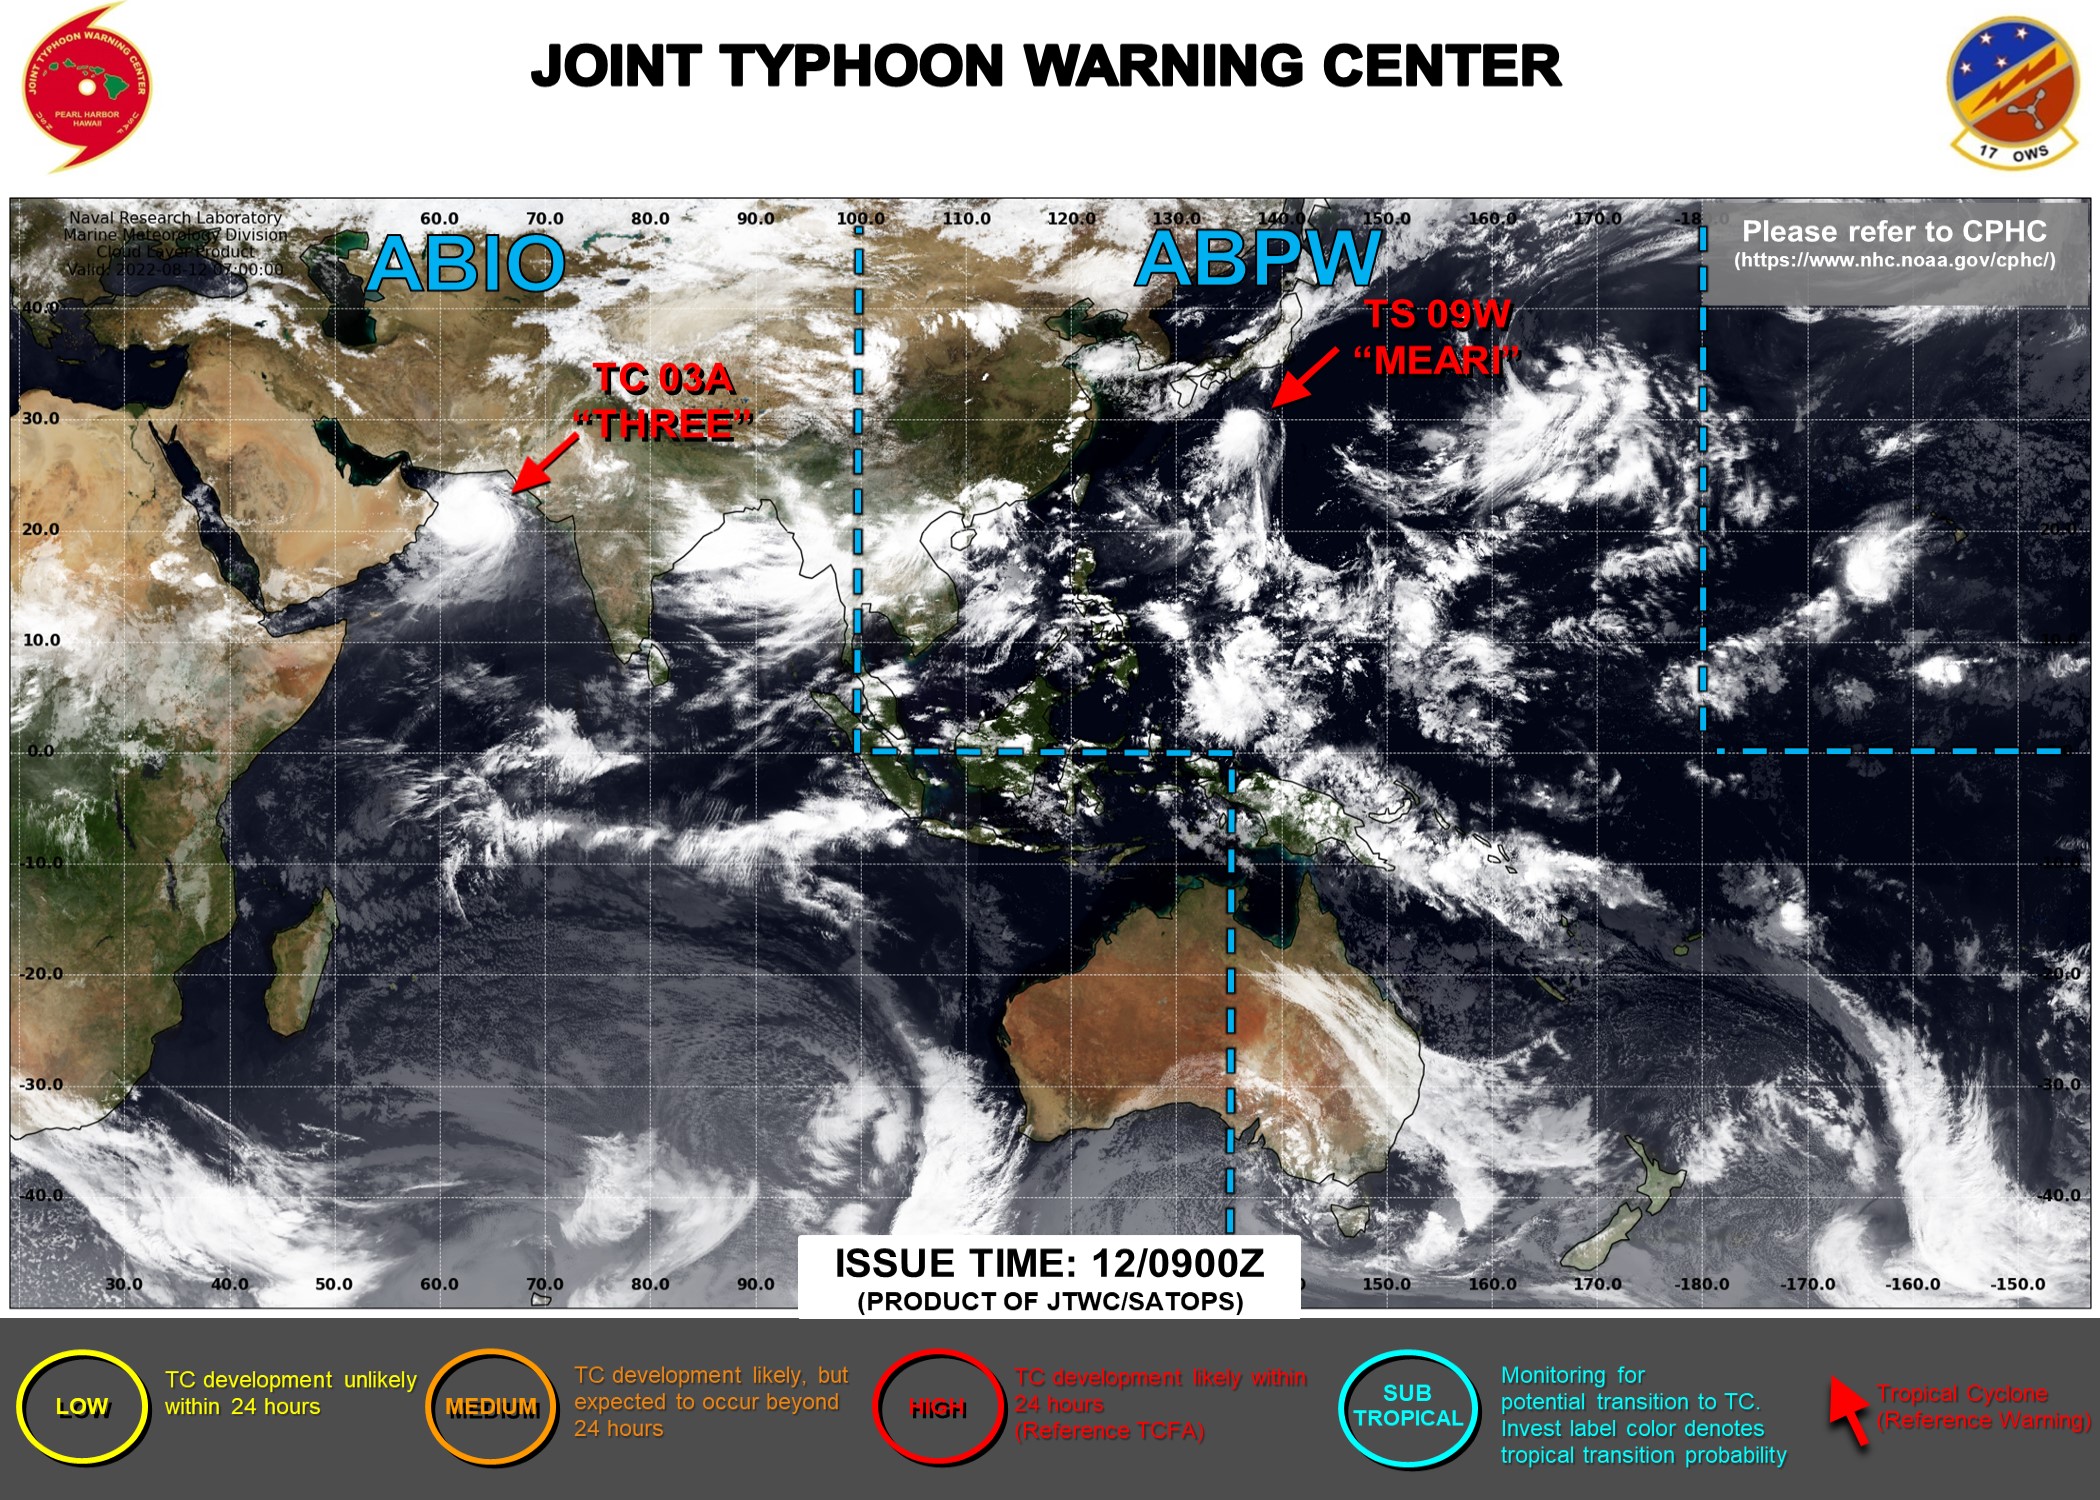 JTWC IS ISSUING 6HOURLY WARNINGS ON TS 09W AND TC 03A. 3HOURLY SATELLITE BULLETINS ARE ISSUED ON BOTH SYSTEMS AND ON INVEST 90C.